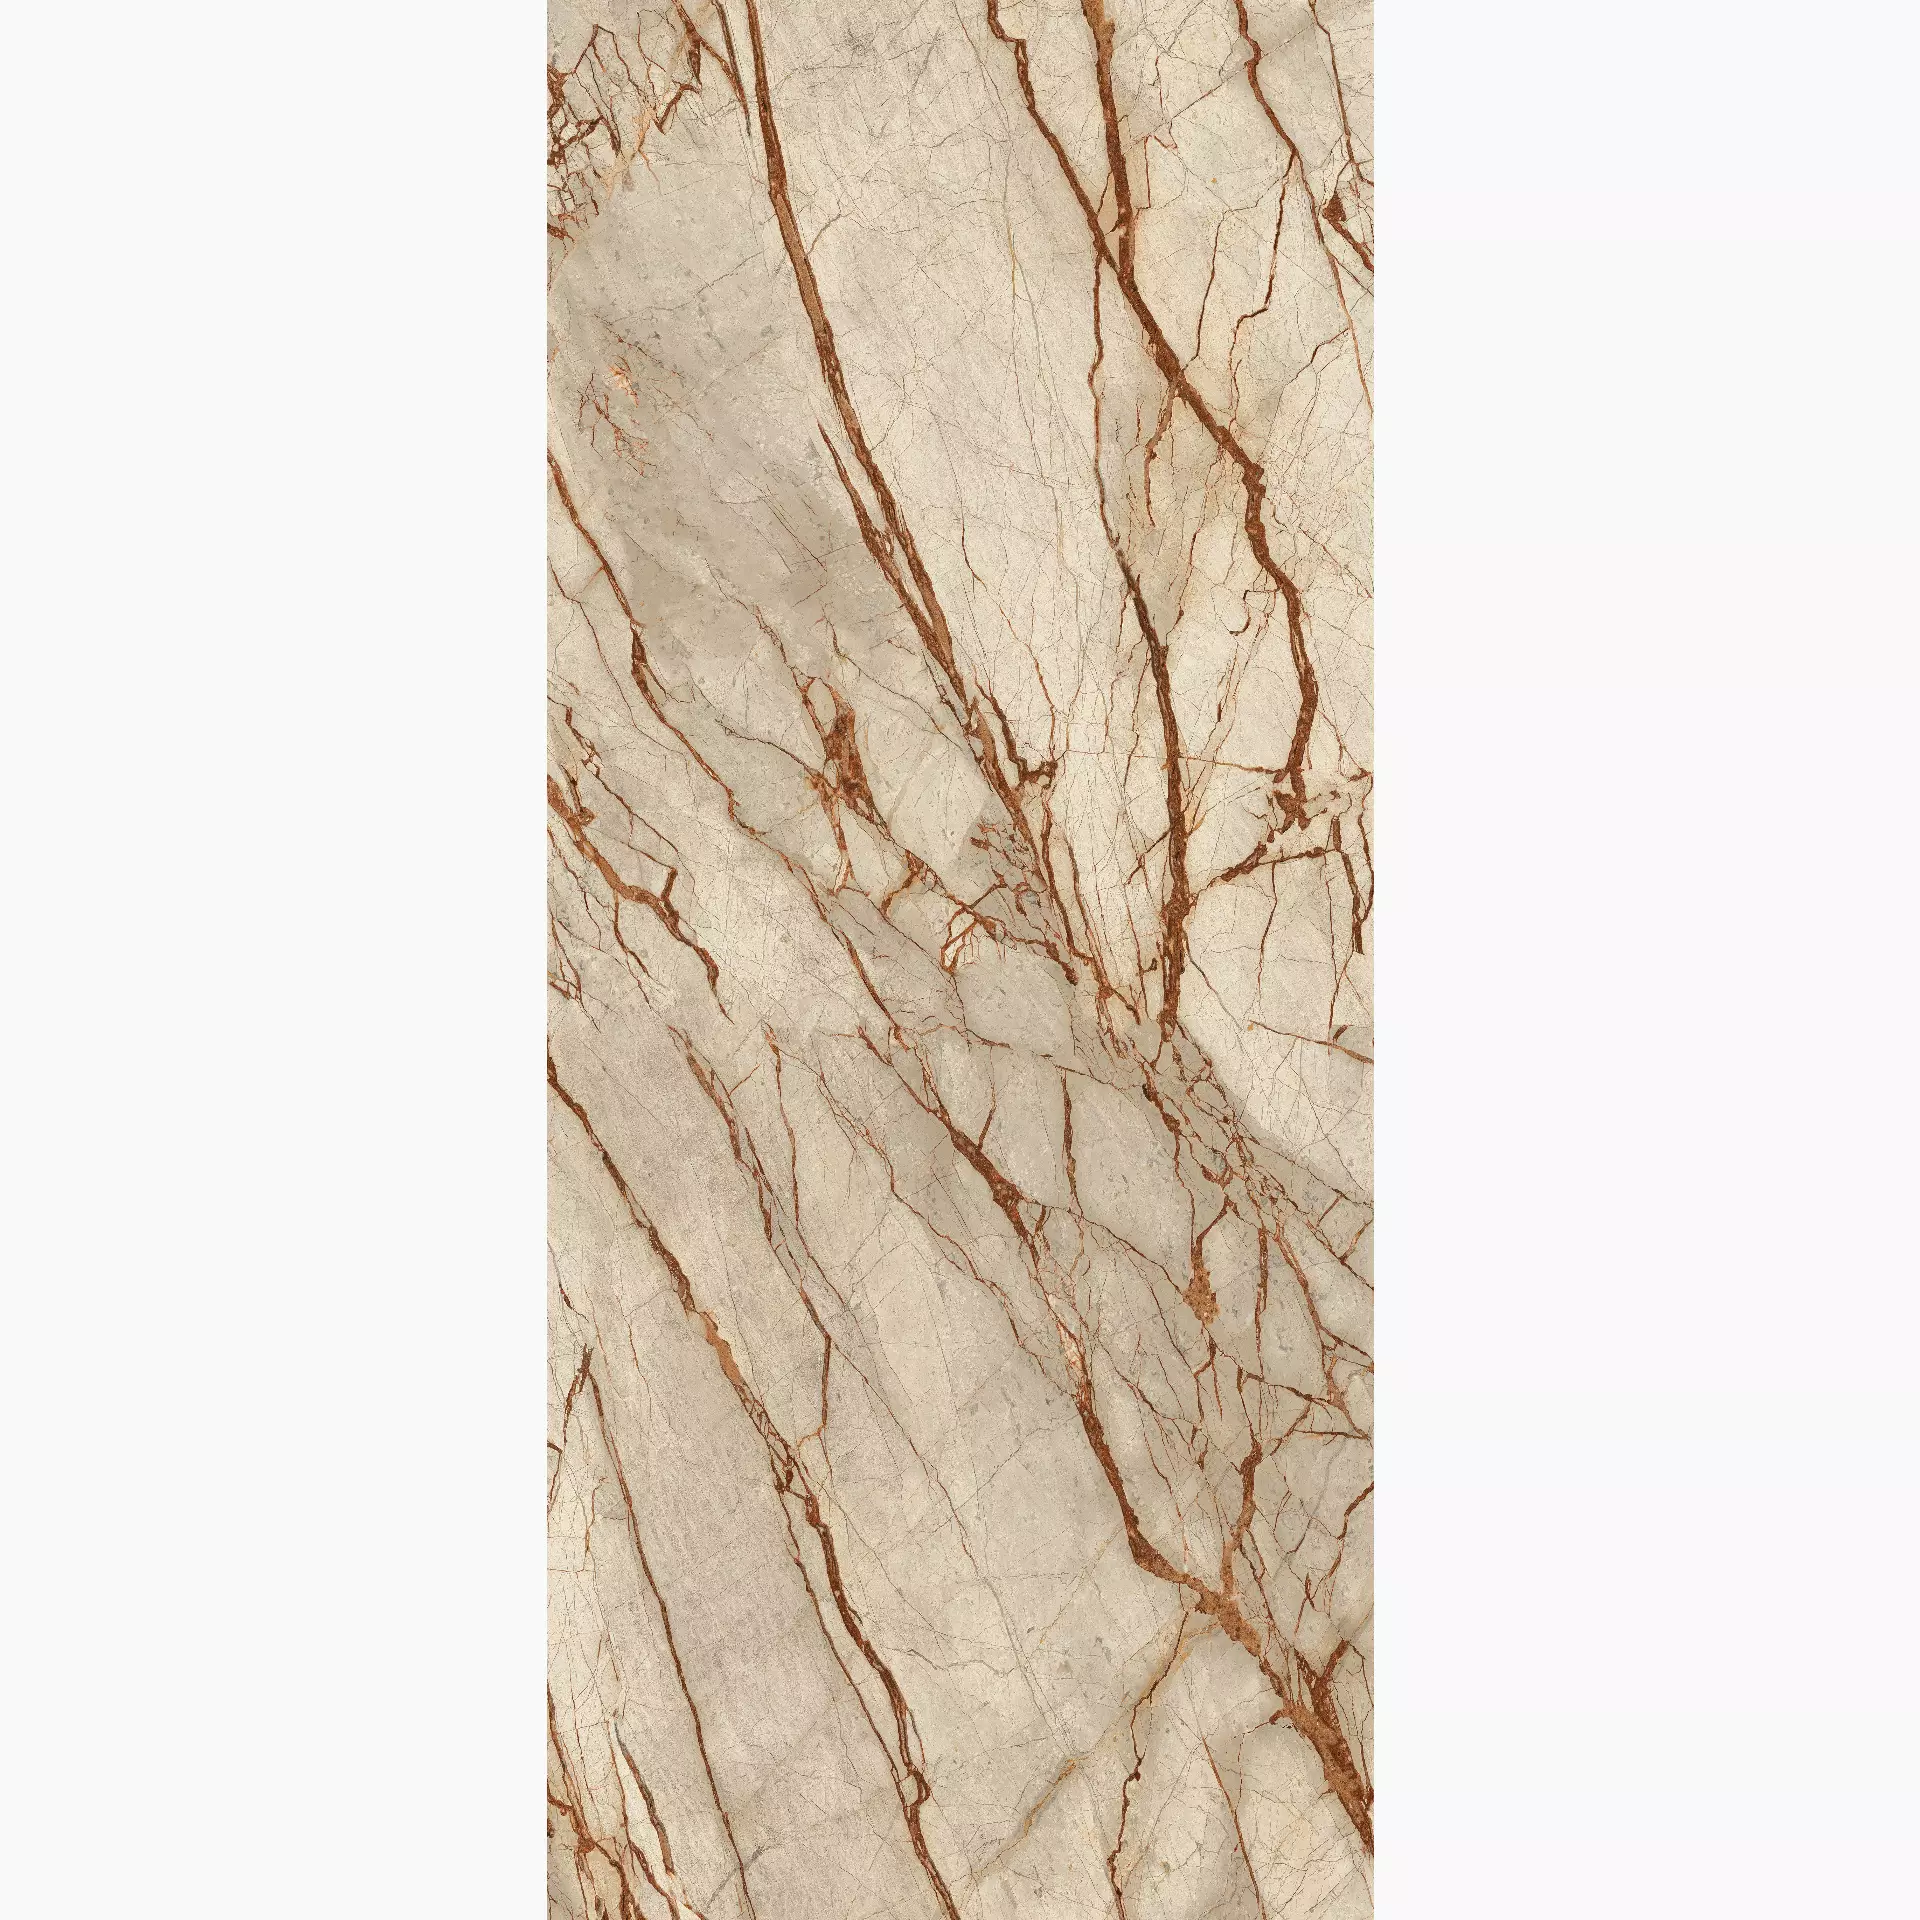 Fondovalle Infinito 2.0 Gold River Glossy INF1882 120x278cm rectified 6,5mm